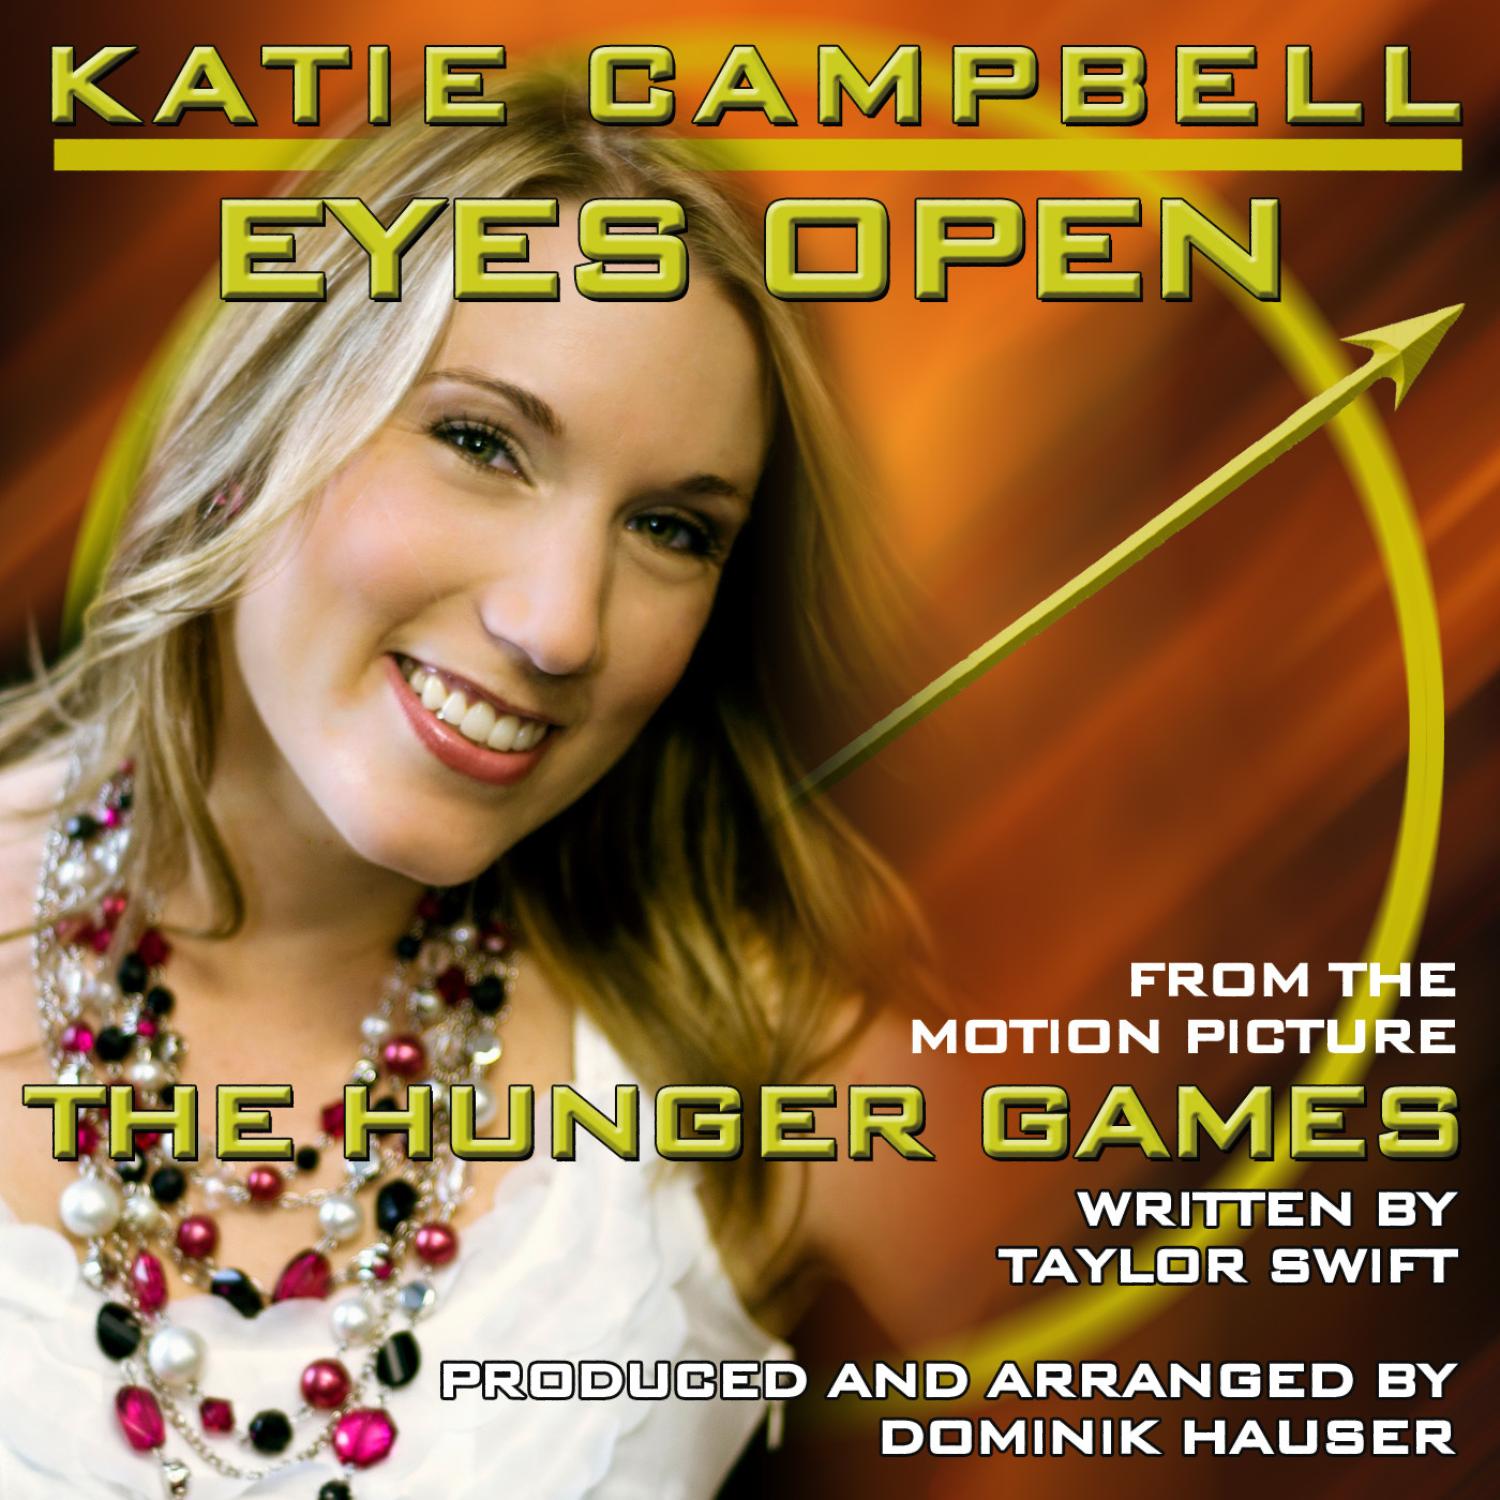 The Hunger Games - "Eyes Open"